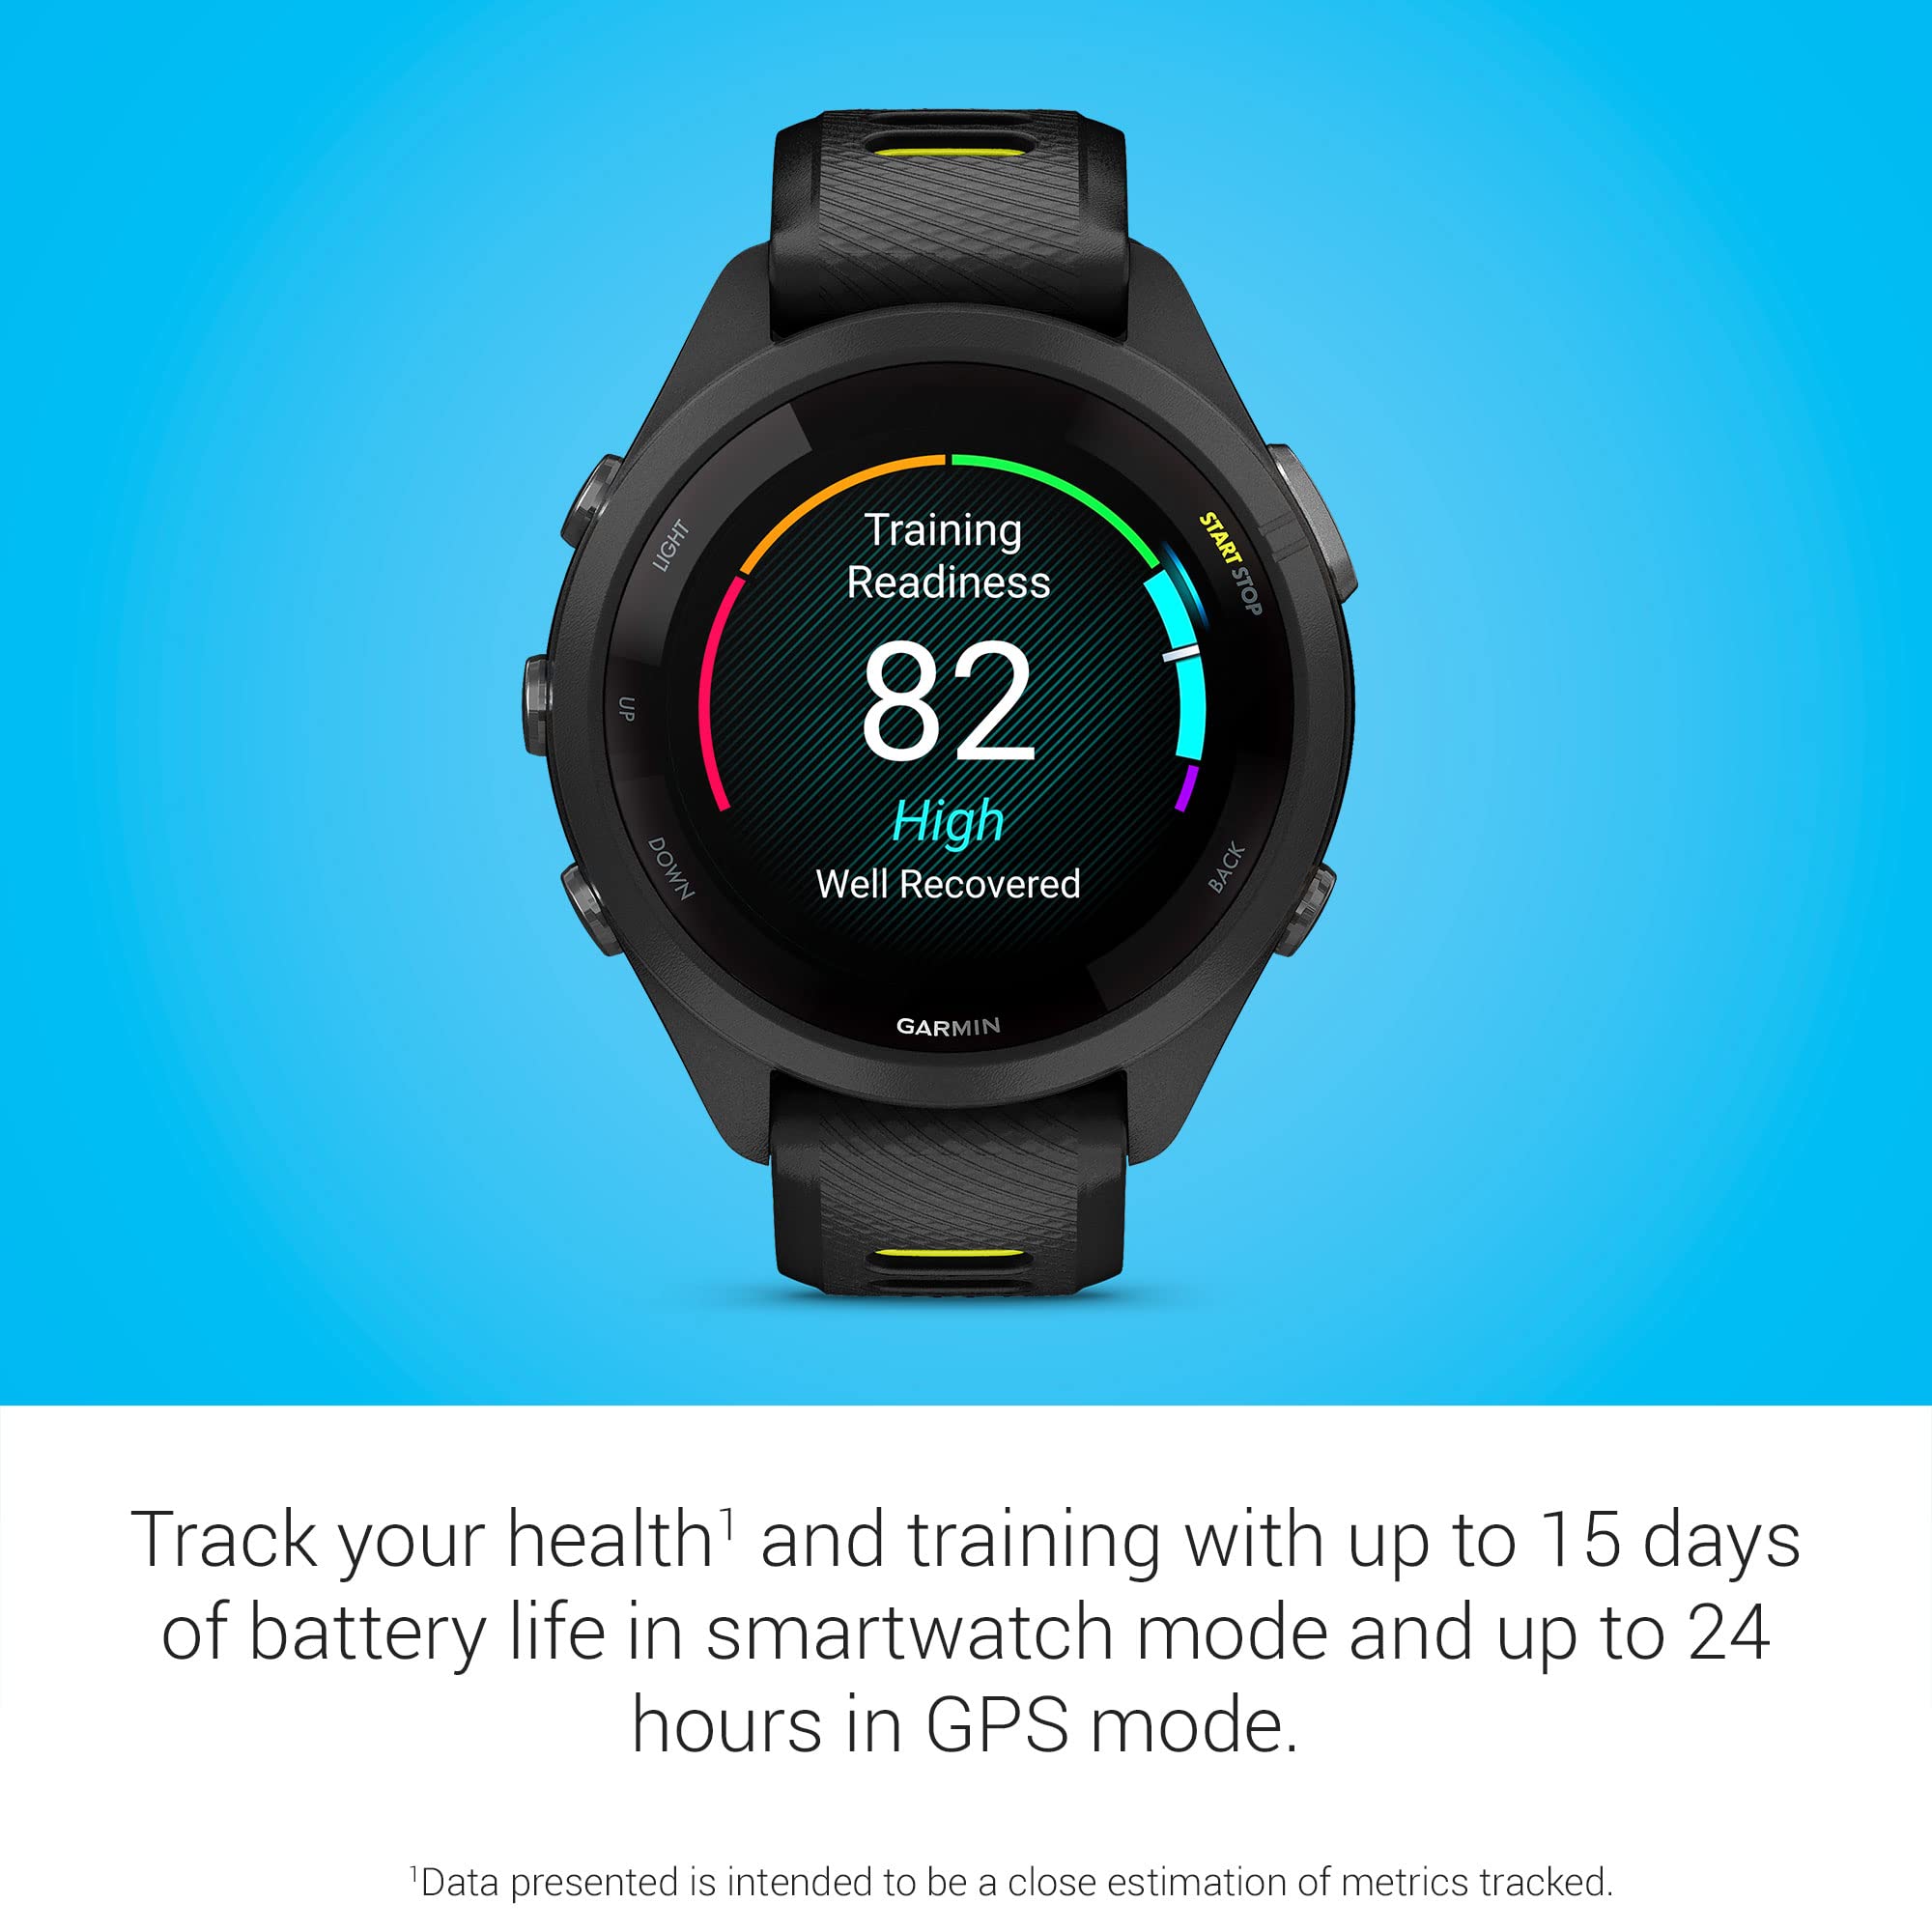 Garmin Forerunner 265S Running Smartwatch, Colorful AMOLED Display, Training Metrics and Recovery Insights, Black and Amp Yellow